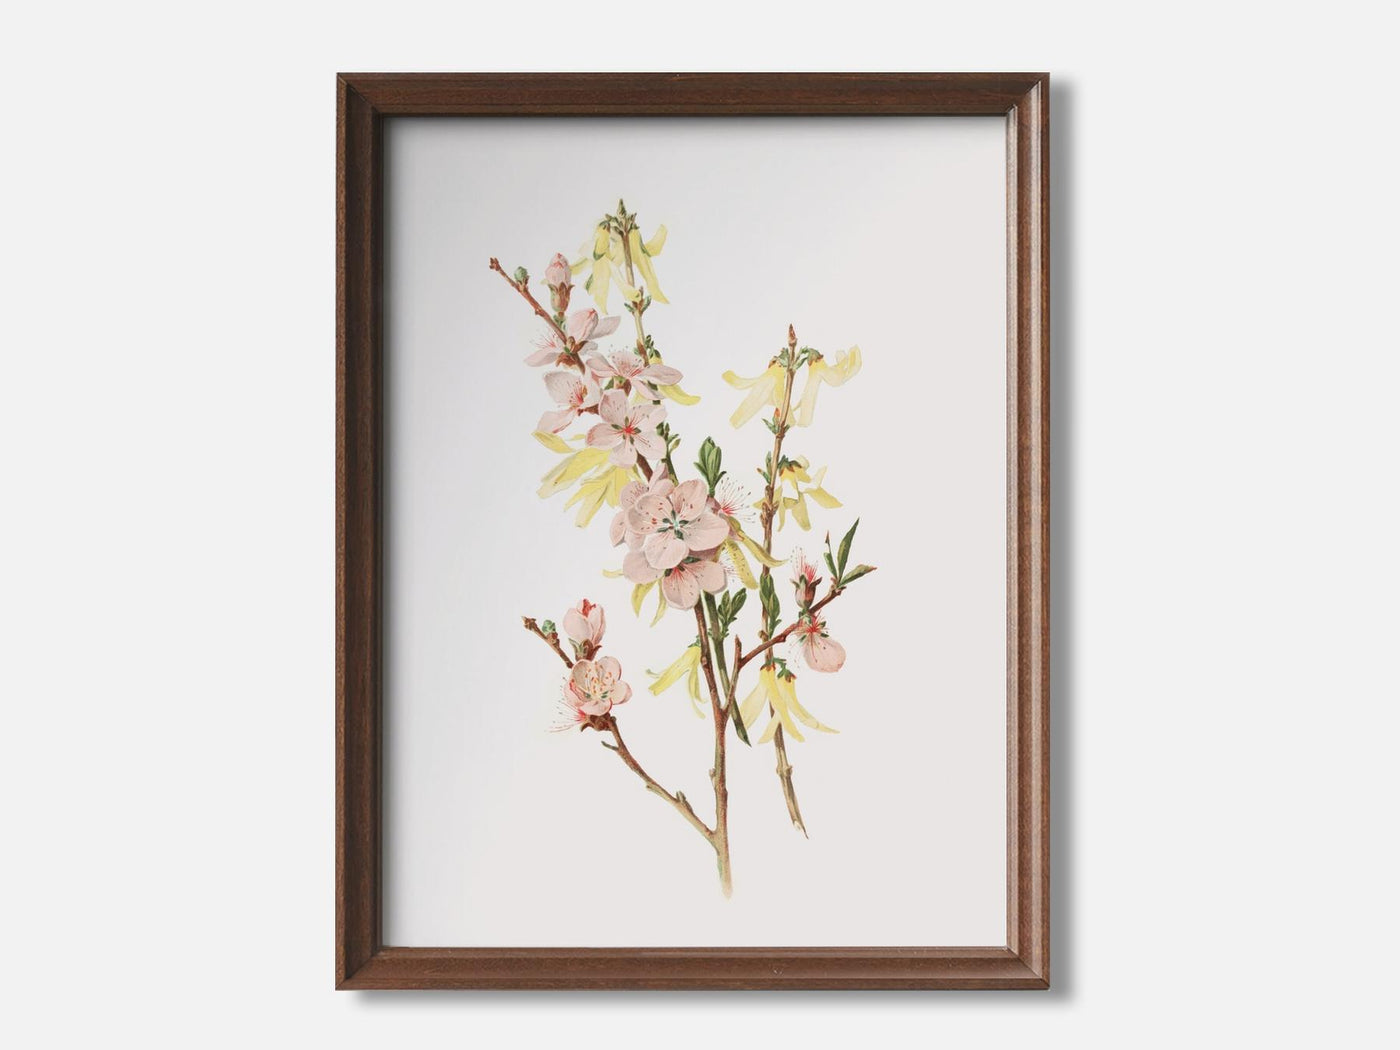 Peach Blossoms and Forsythia mockup - A_spr5-V1-PC_F+WA-SS_1-PS_5x7-C_def variant